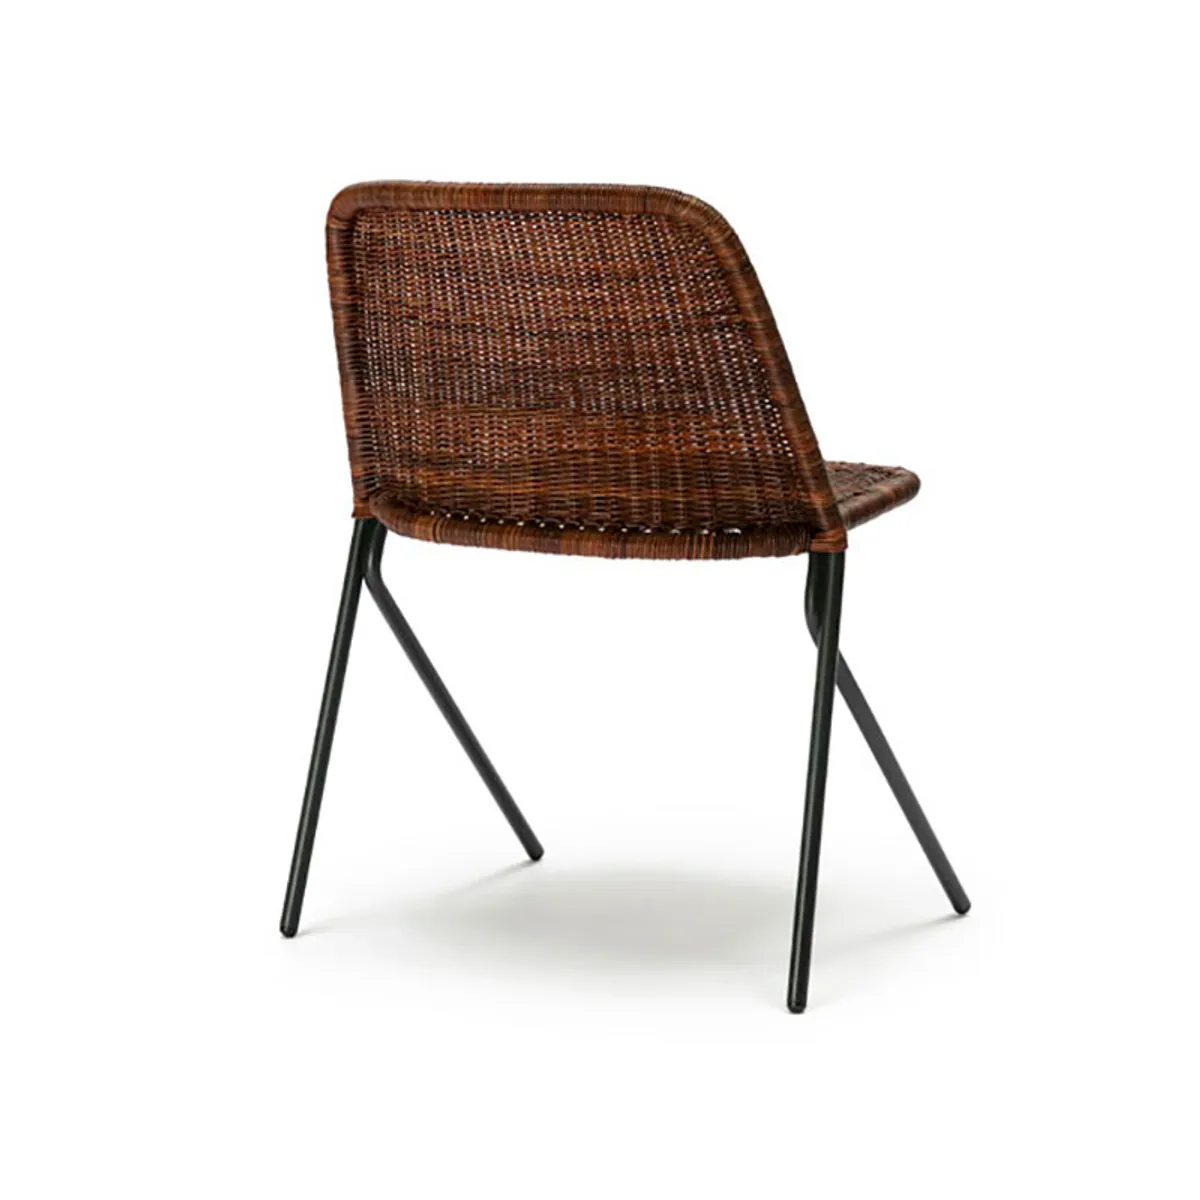 Persi Chair Charcoal Rust Rattan And Metal Chair For Furnishing Healthcare And Hotels 2